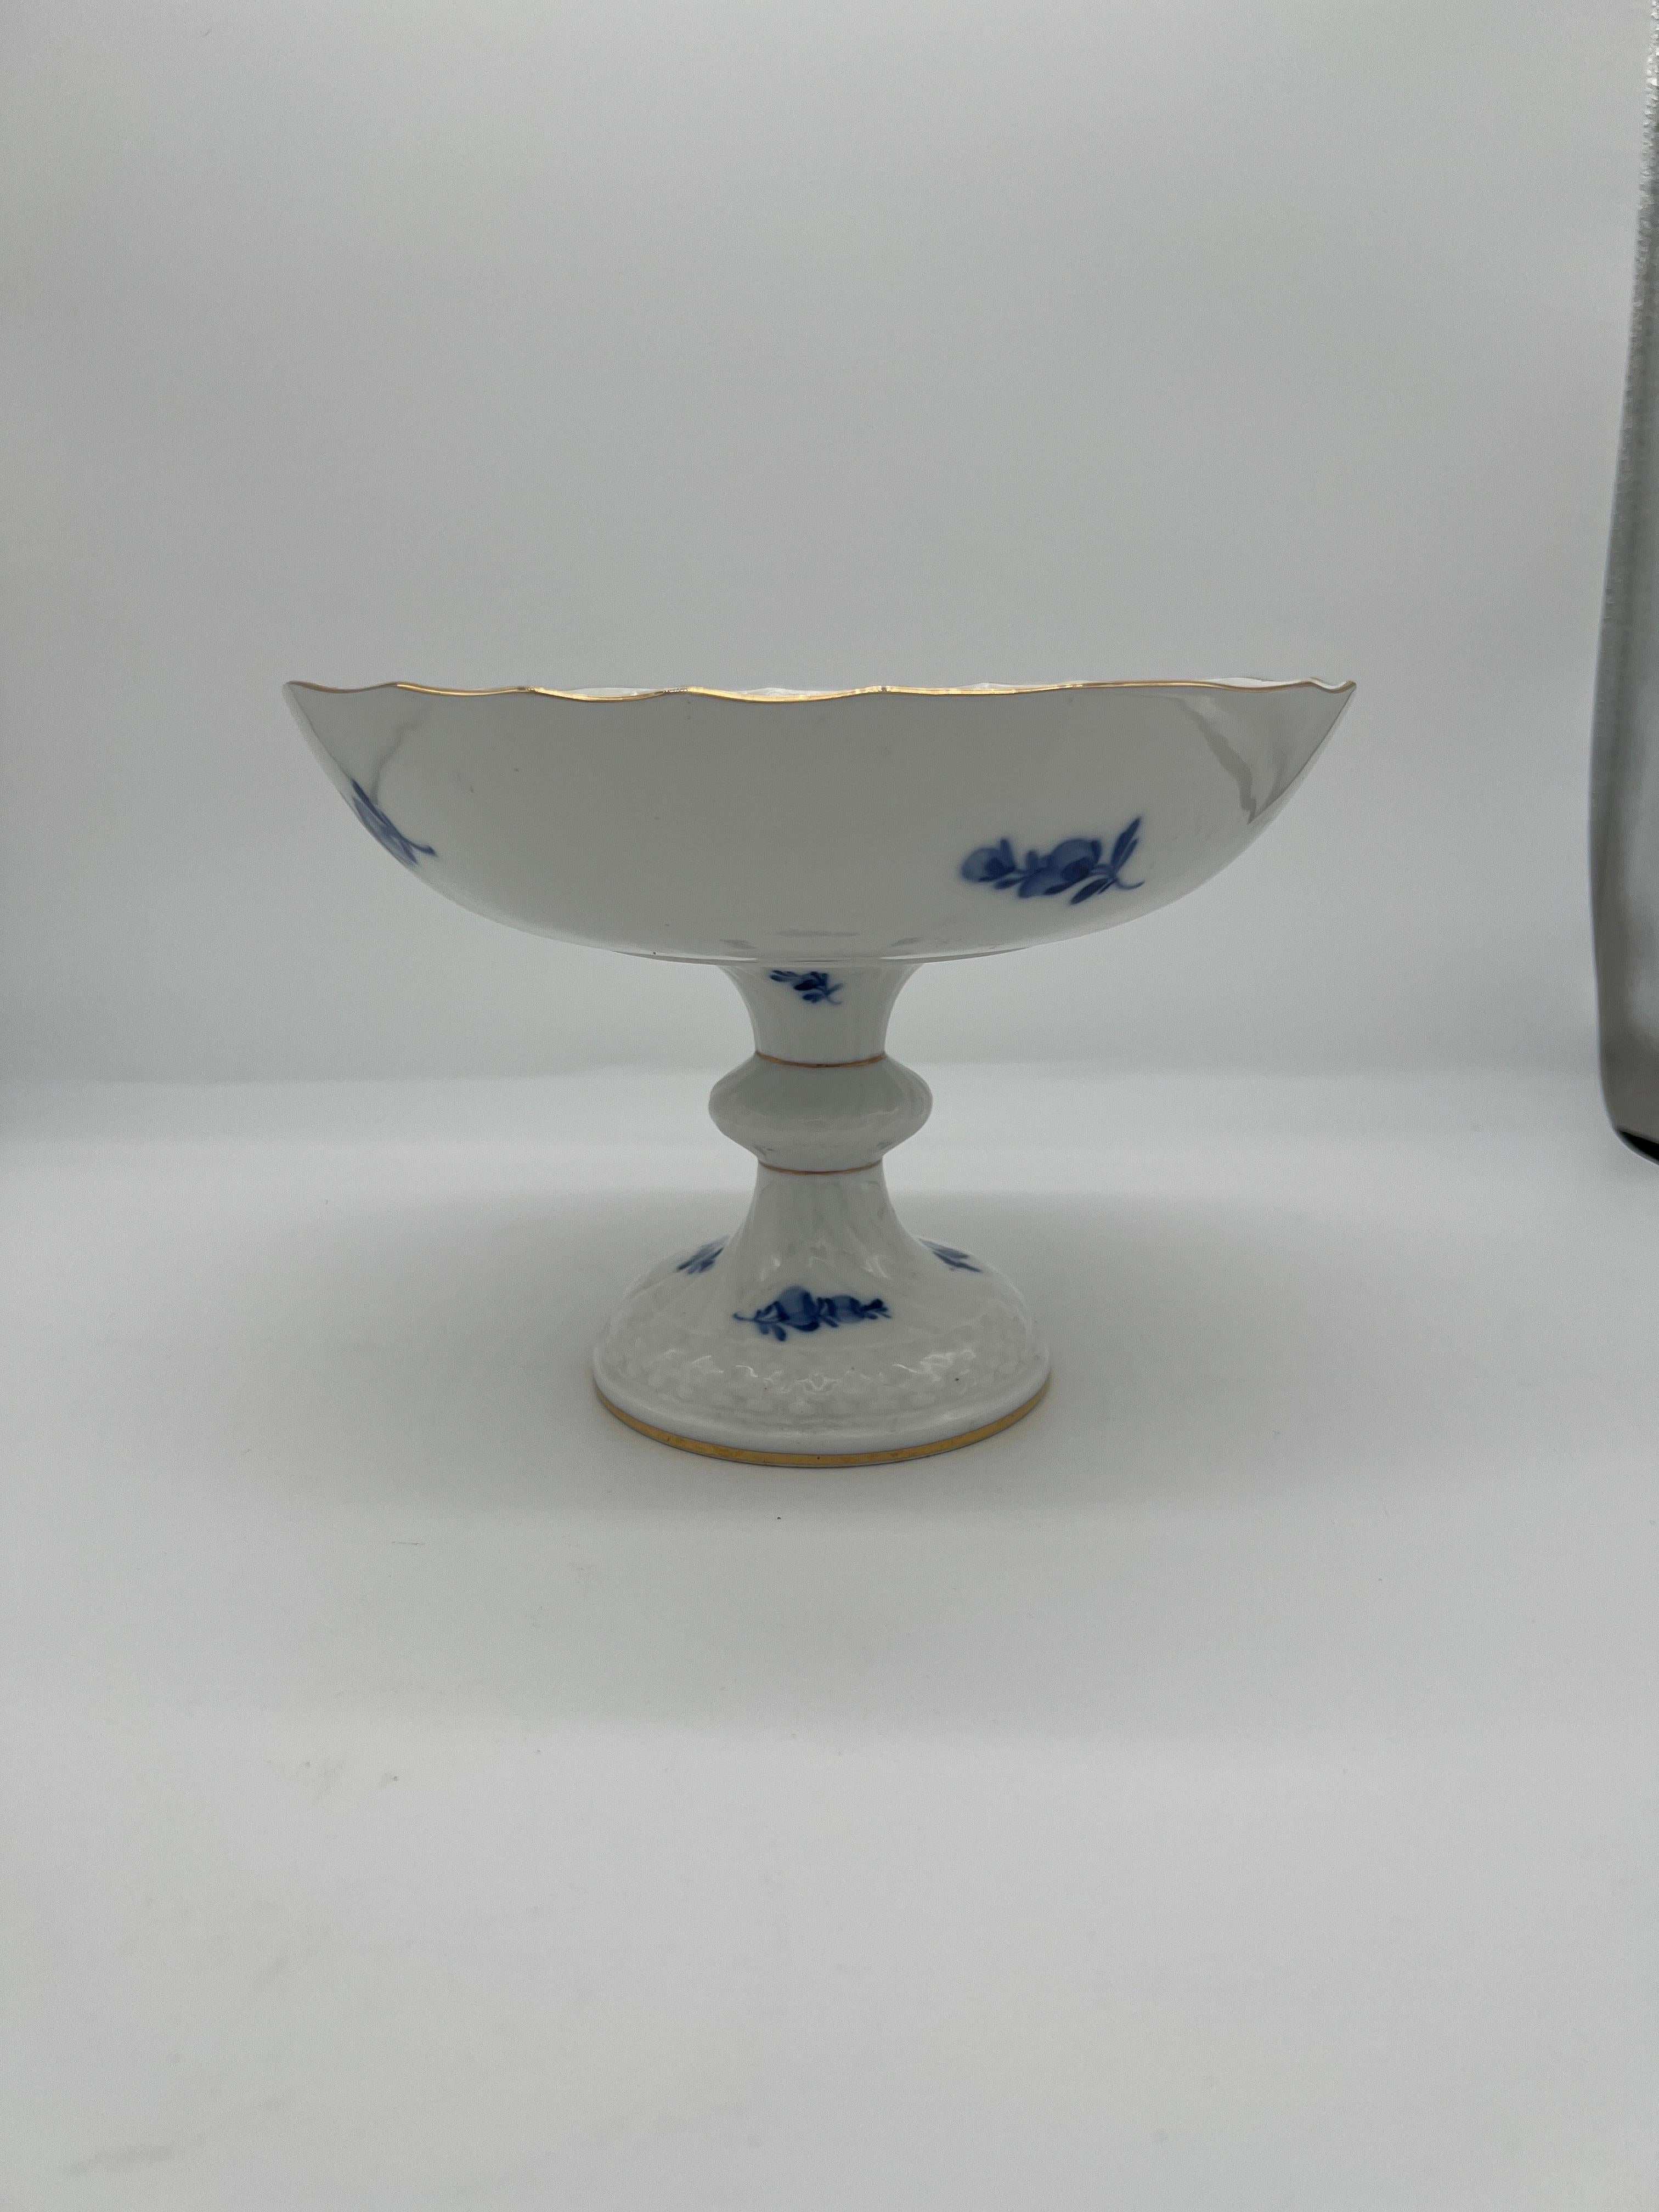 Royal Copenhagen (Danish, founded 1775), circa 1970.

A vintage Royal Copenhagen porcelain compote or cake stand. The piece features a swirl effect to the construction, gold detail to the scalloped rim and foot and a beautiful blue and white floral